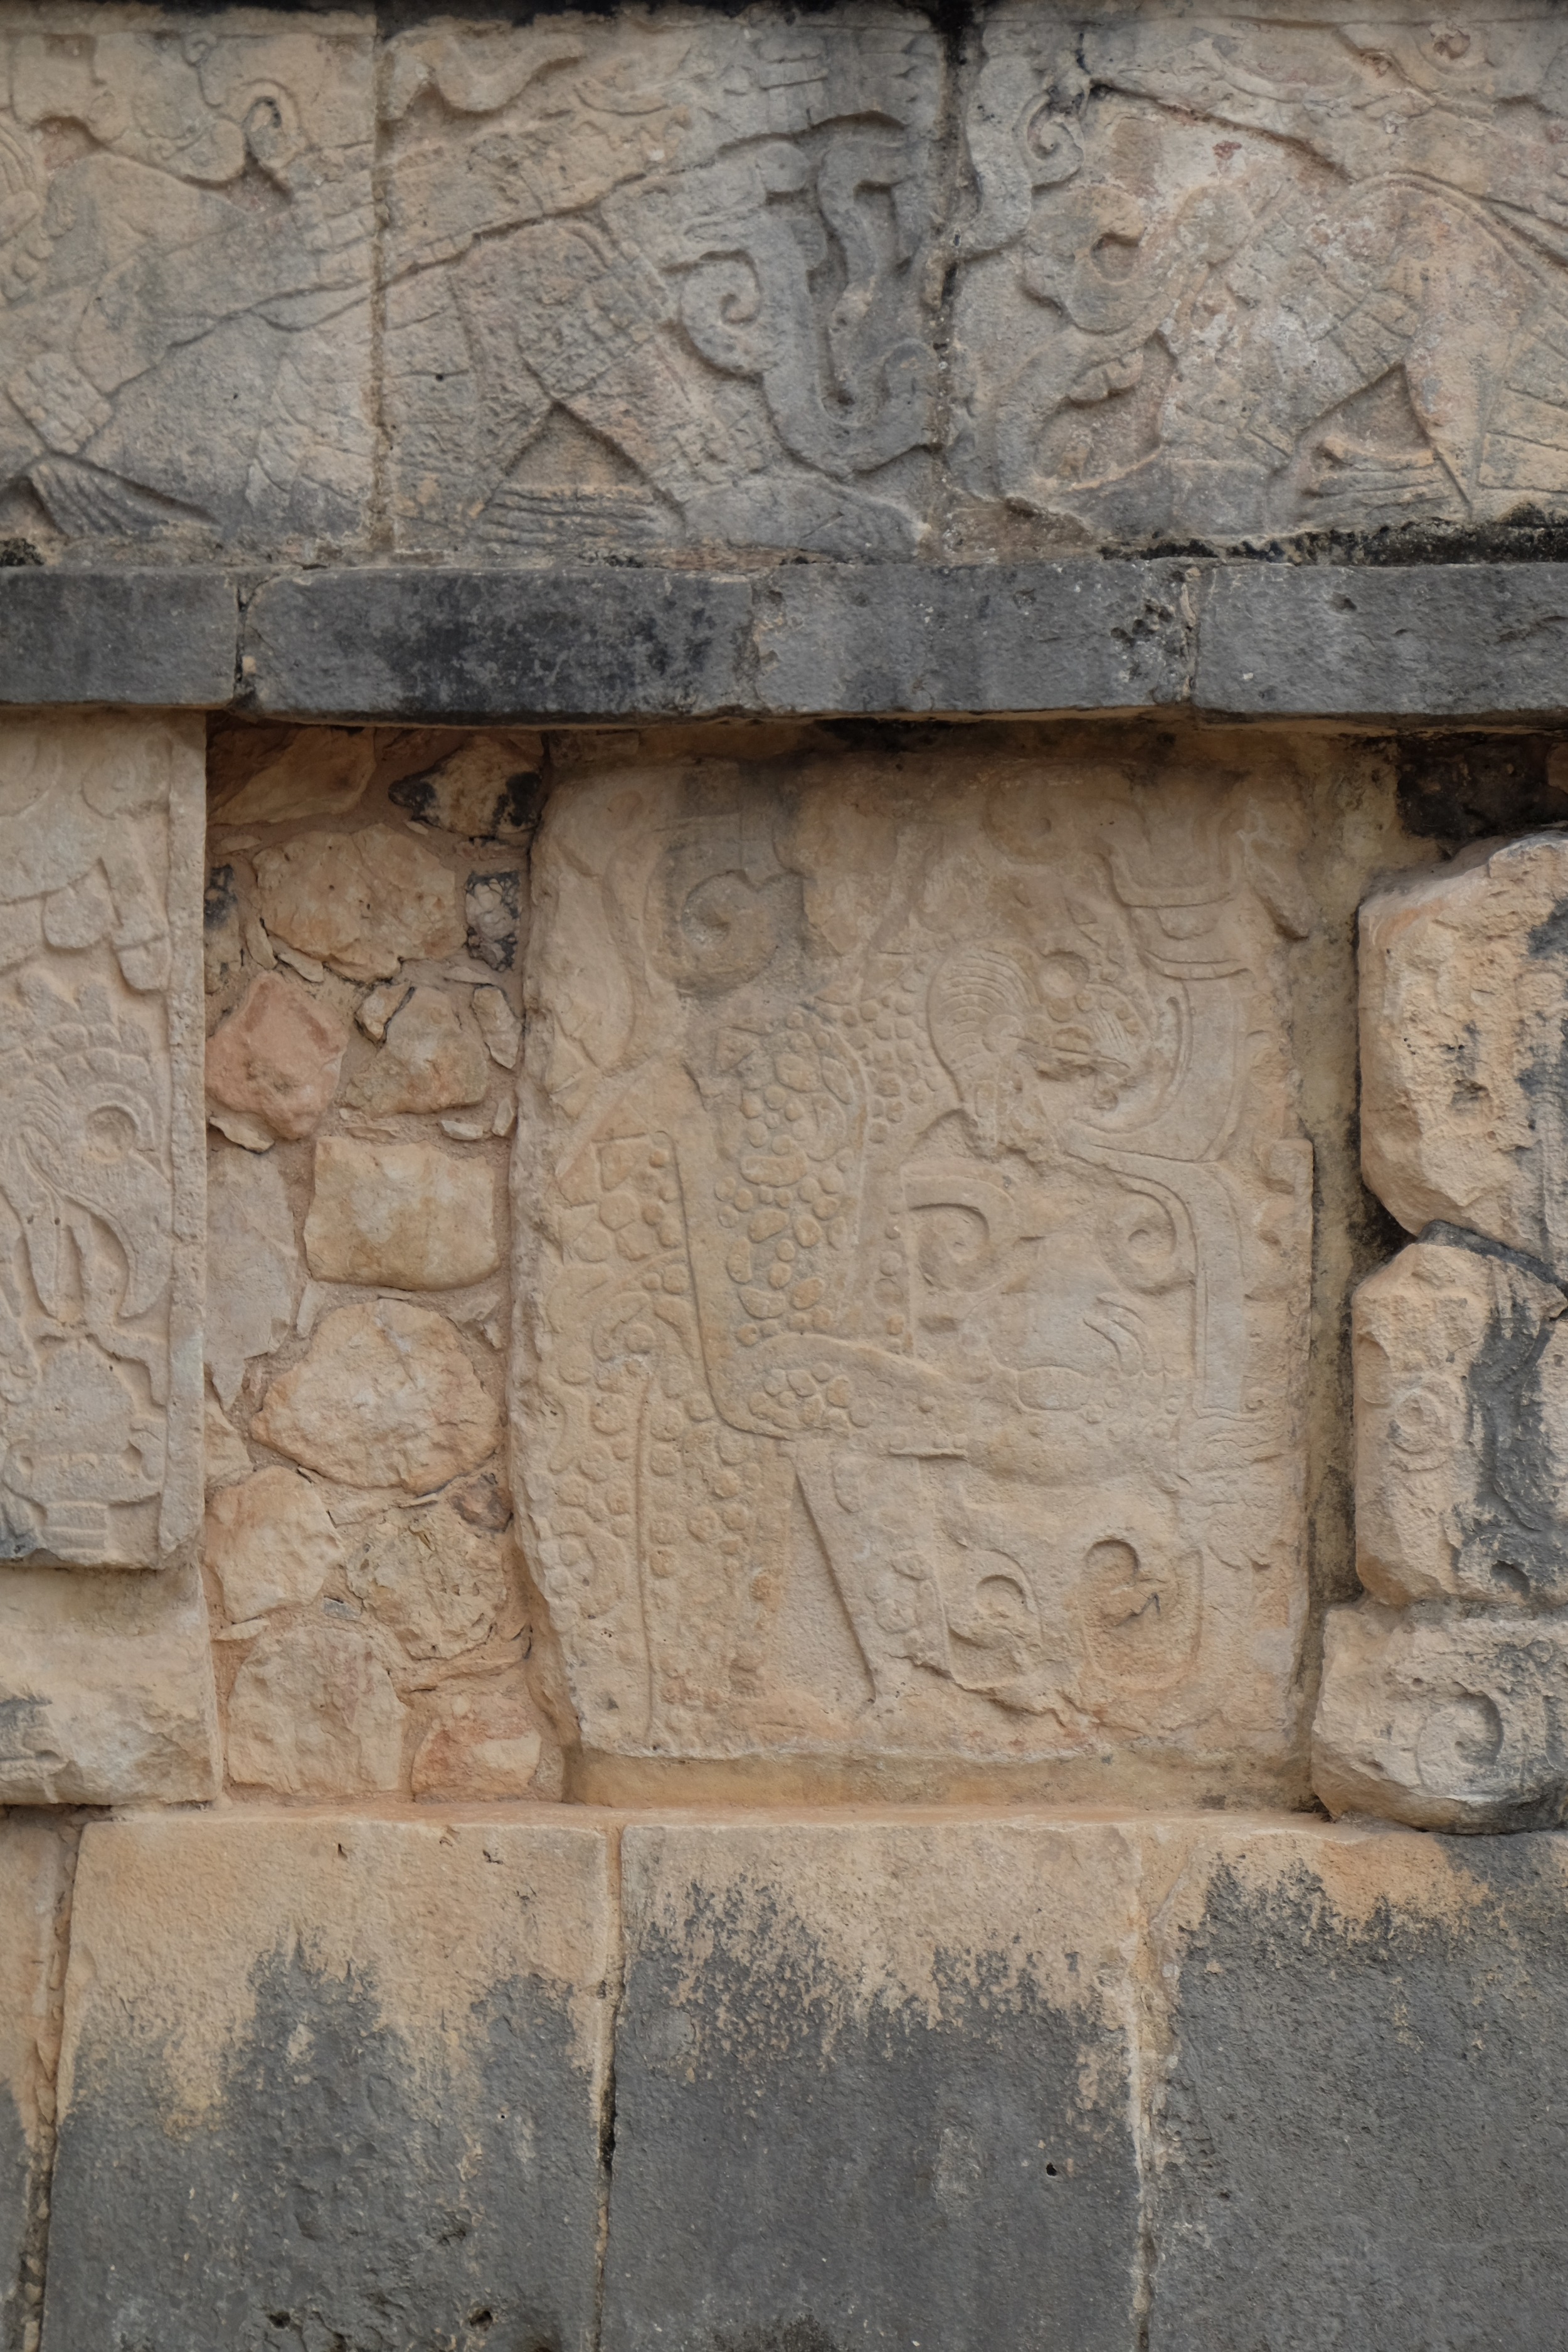 Carving from Chichen Itza